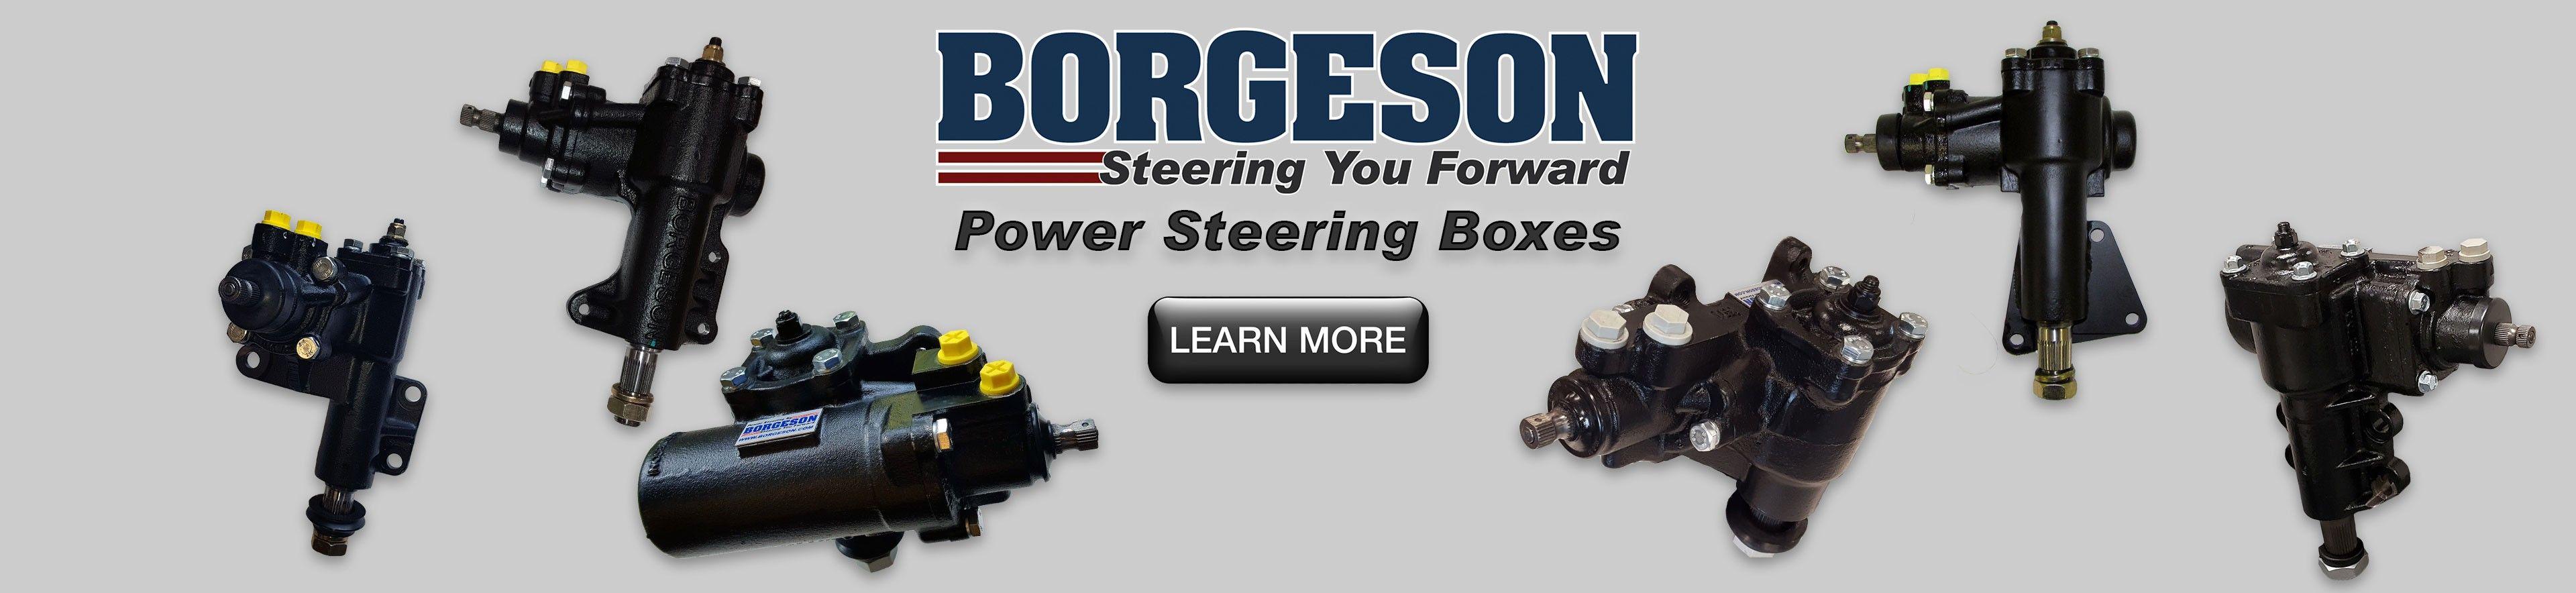 Power Steering Boxes